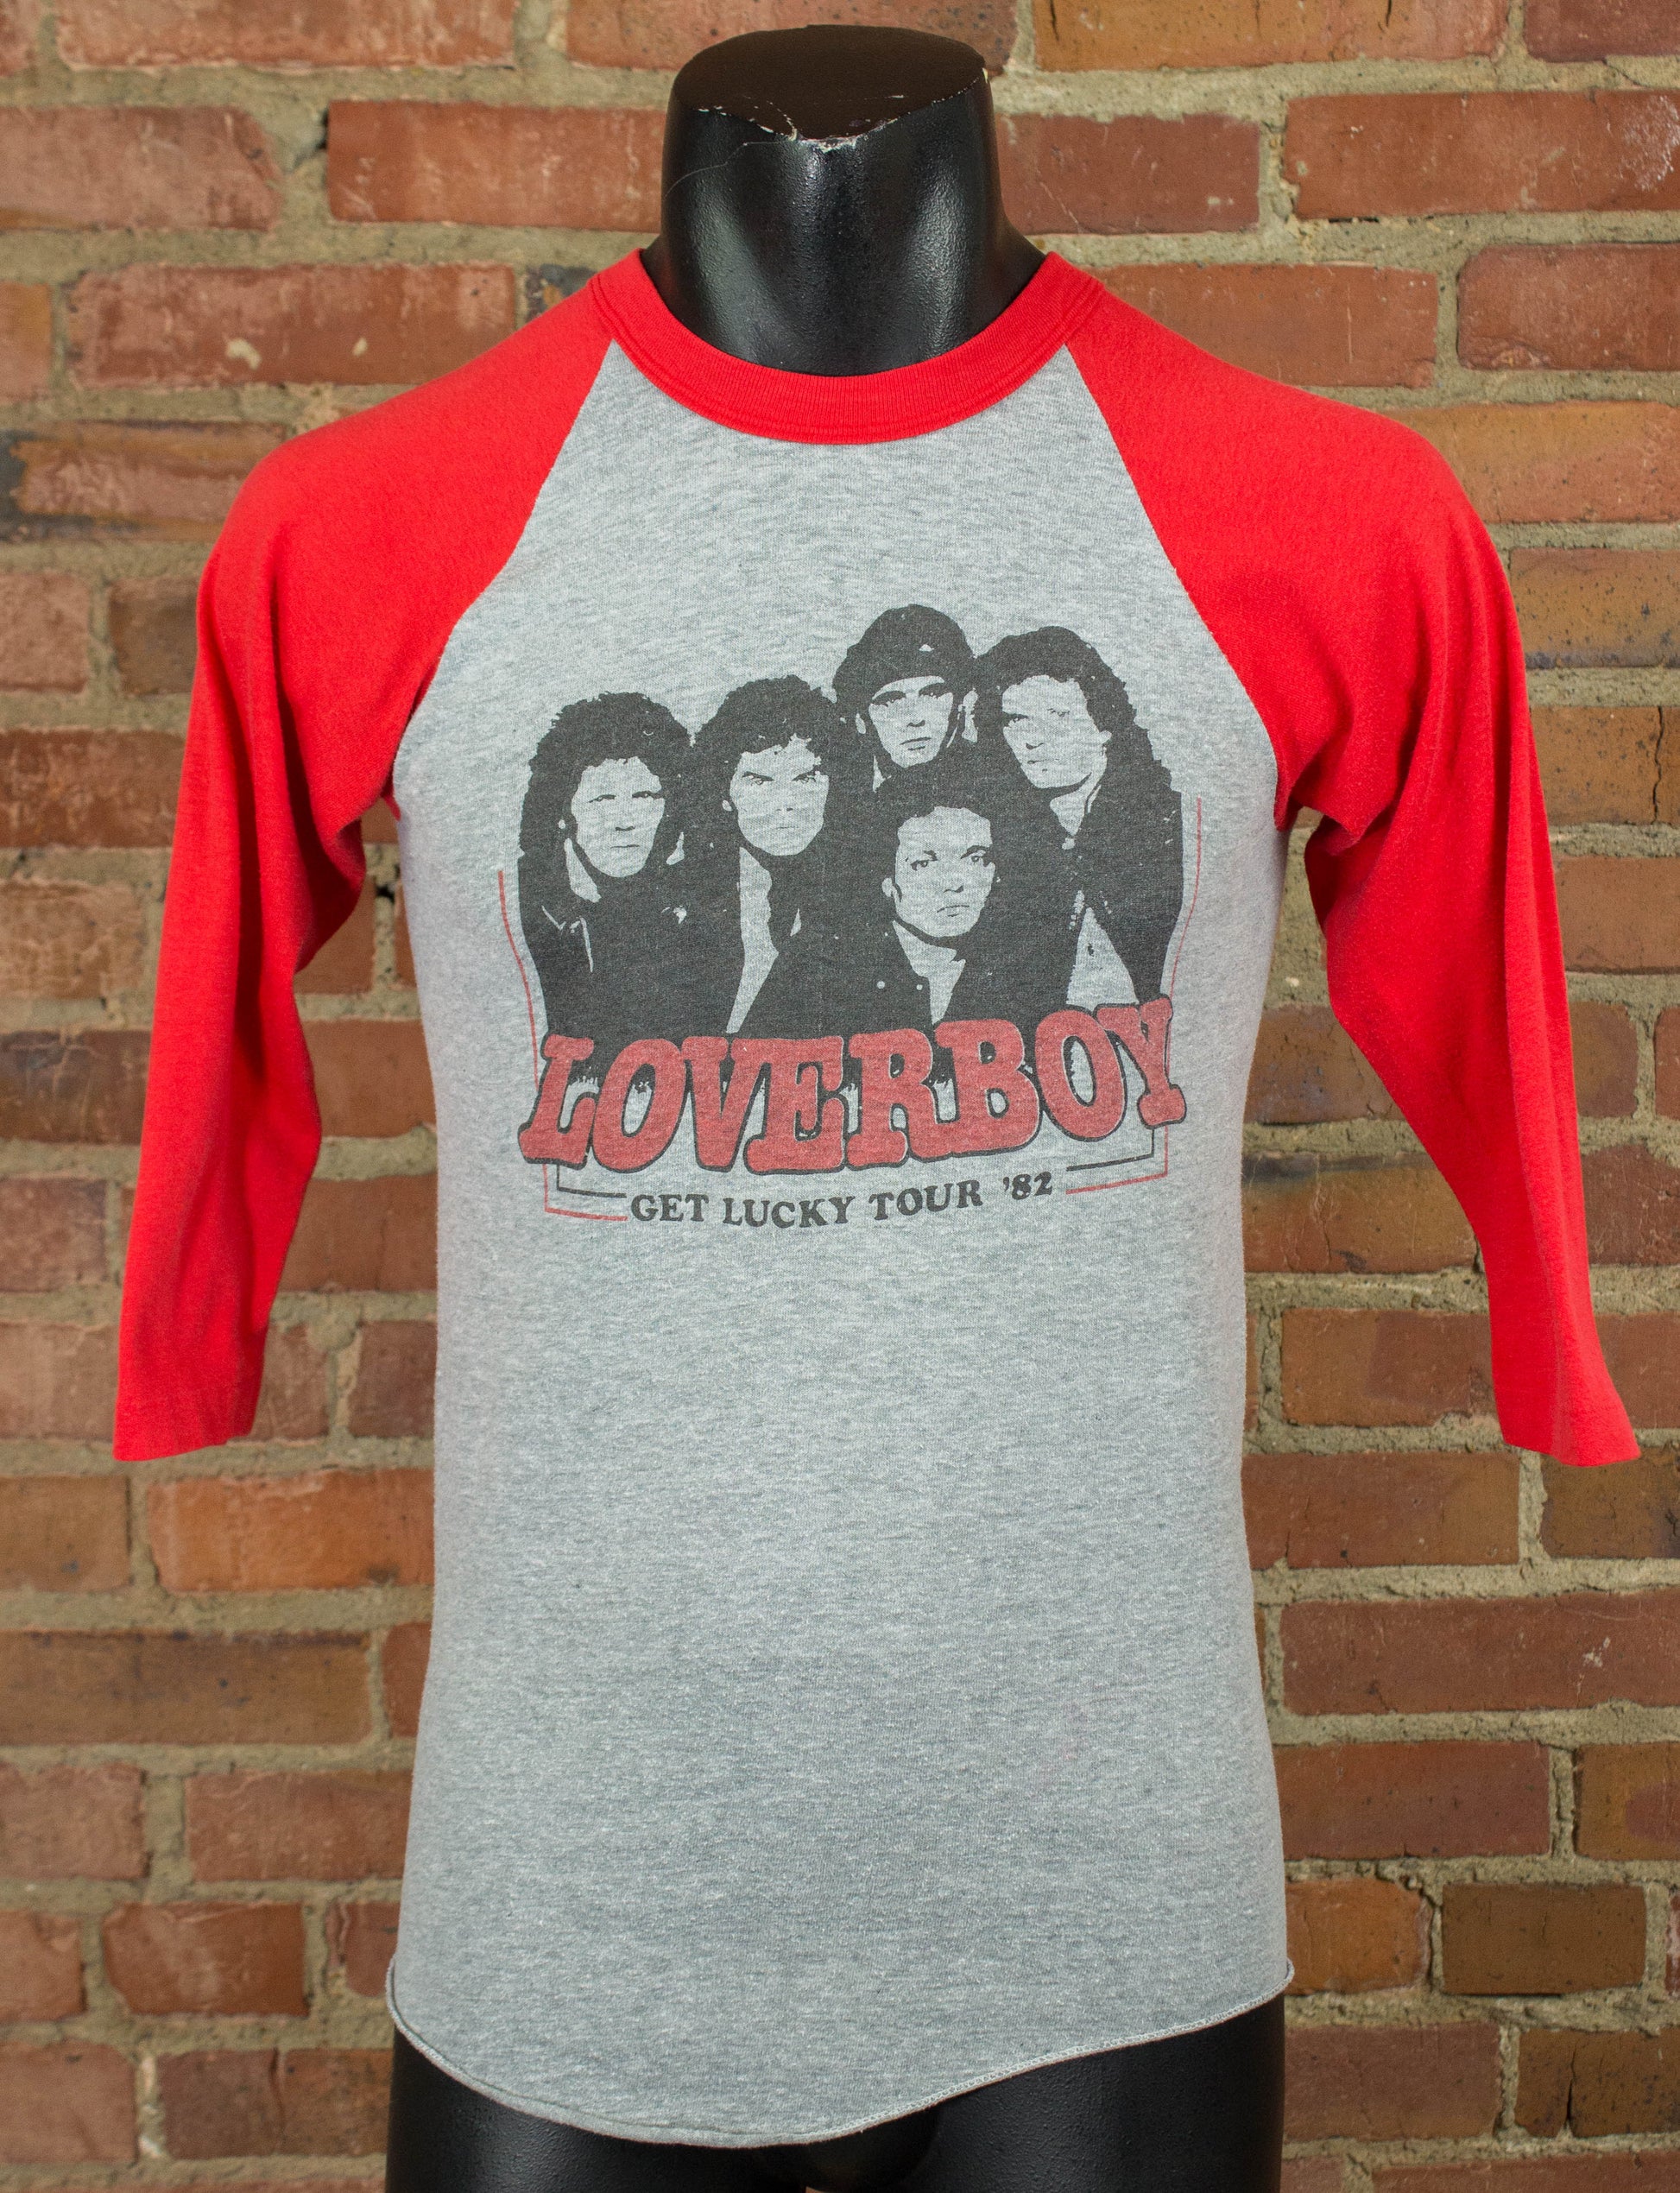 Vintage Loverboy Concert T Shirt 1982 Get Lucky Tour Red and Grey Raglan Jersey Small